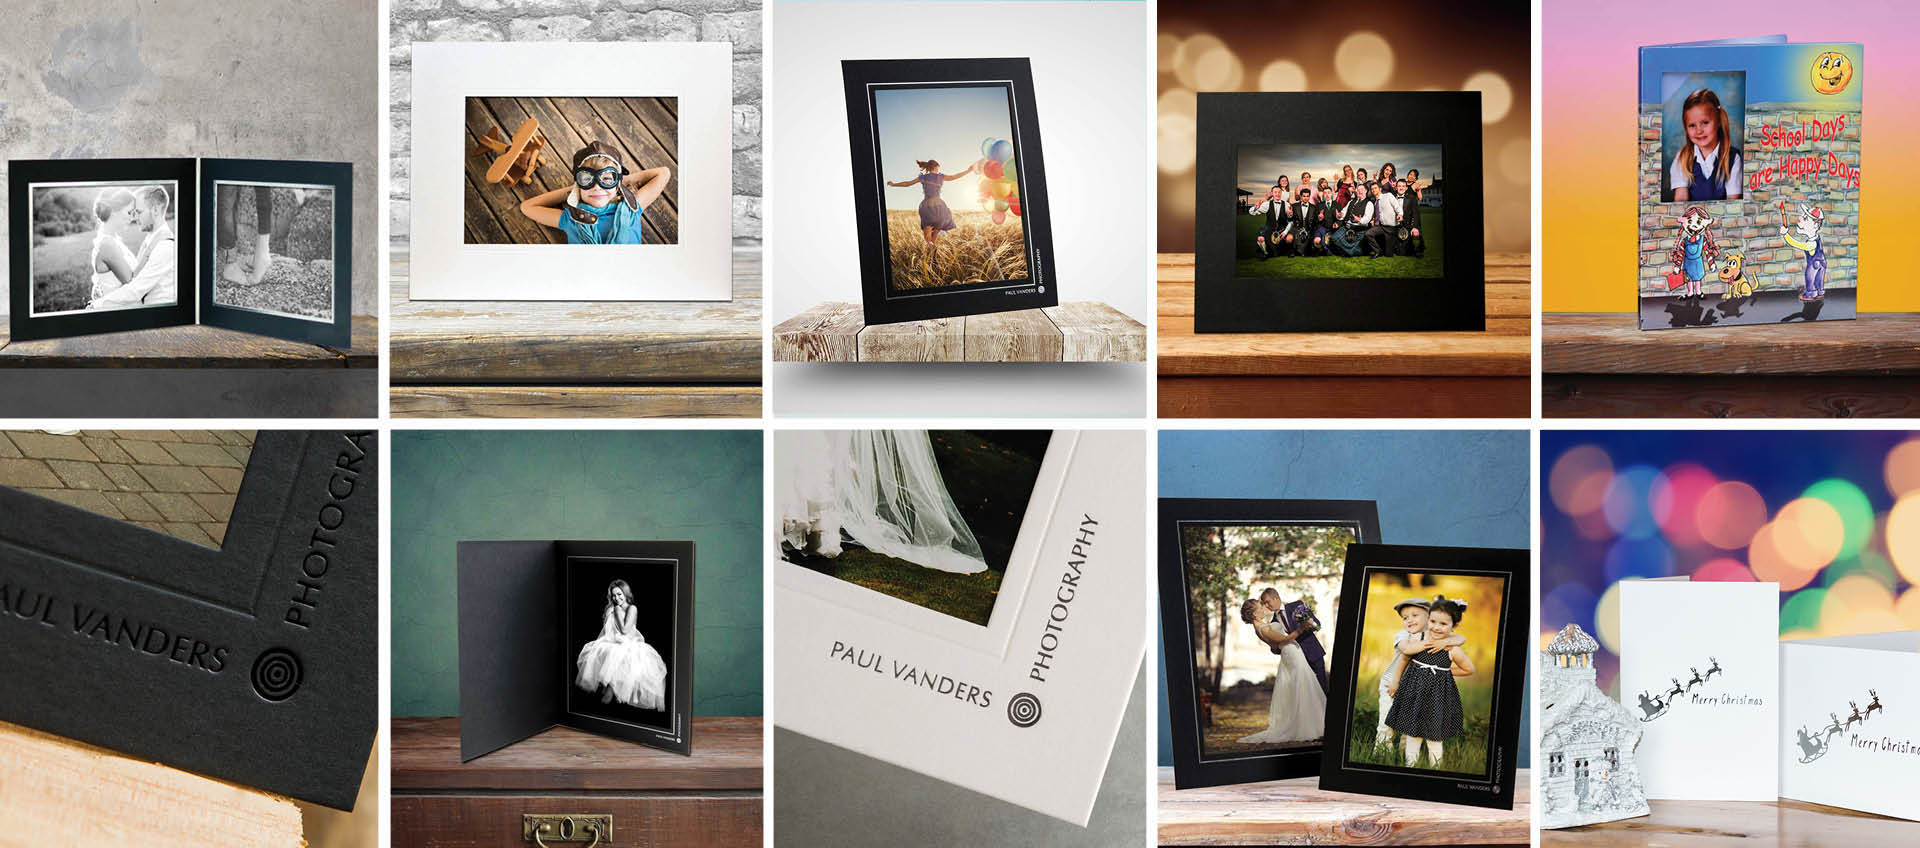 Brand your mounts and folders to promote your photography business